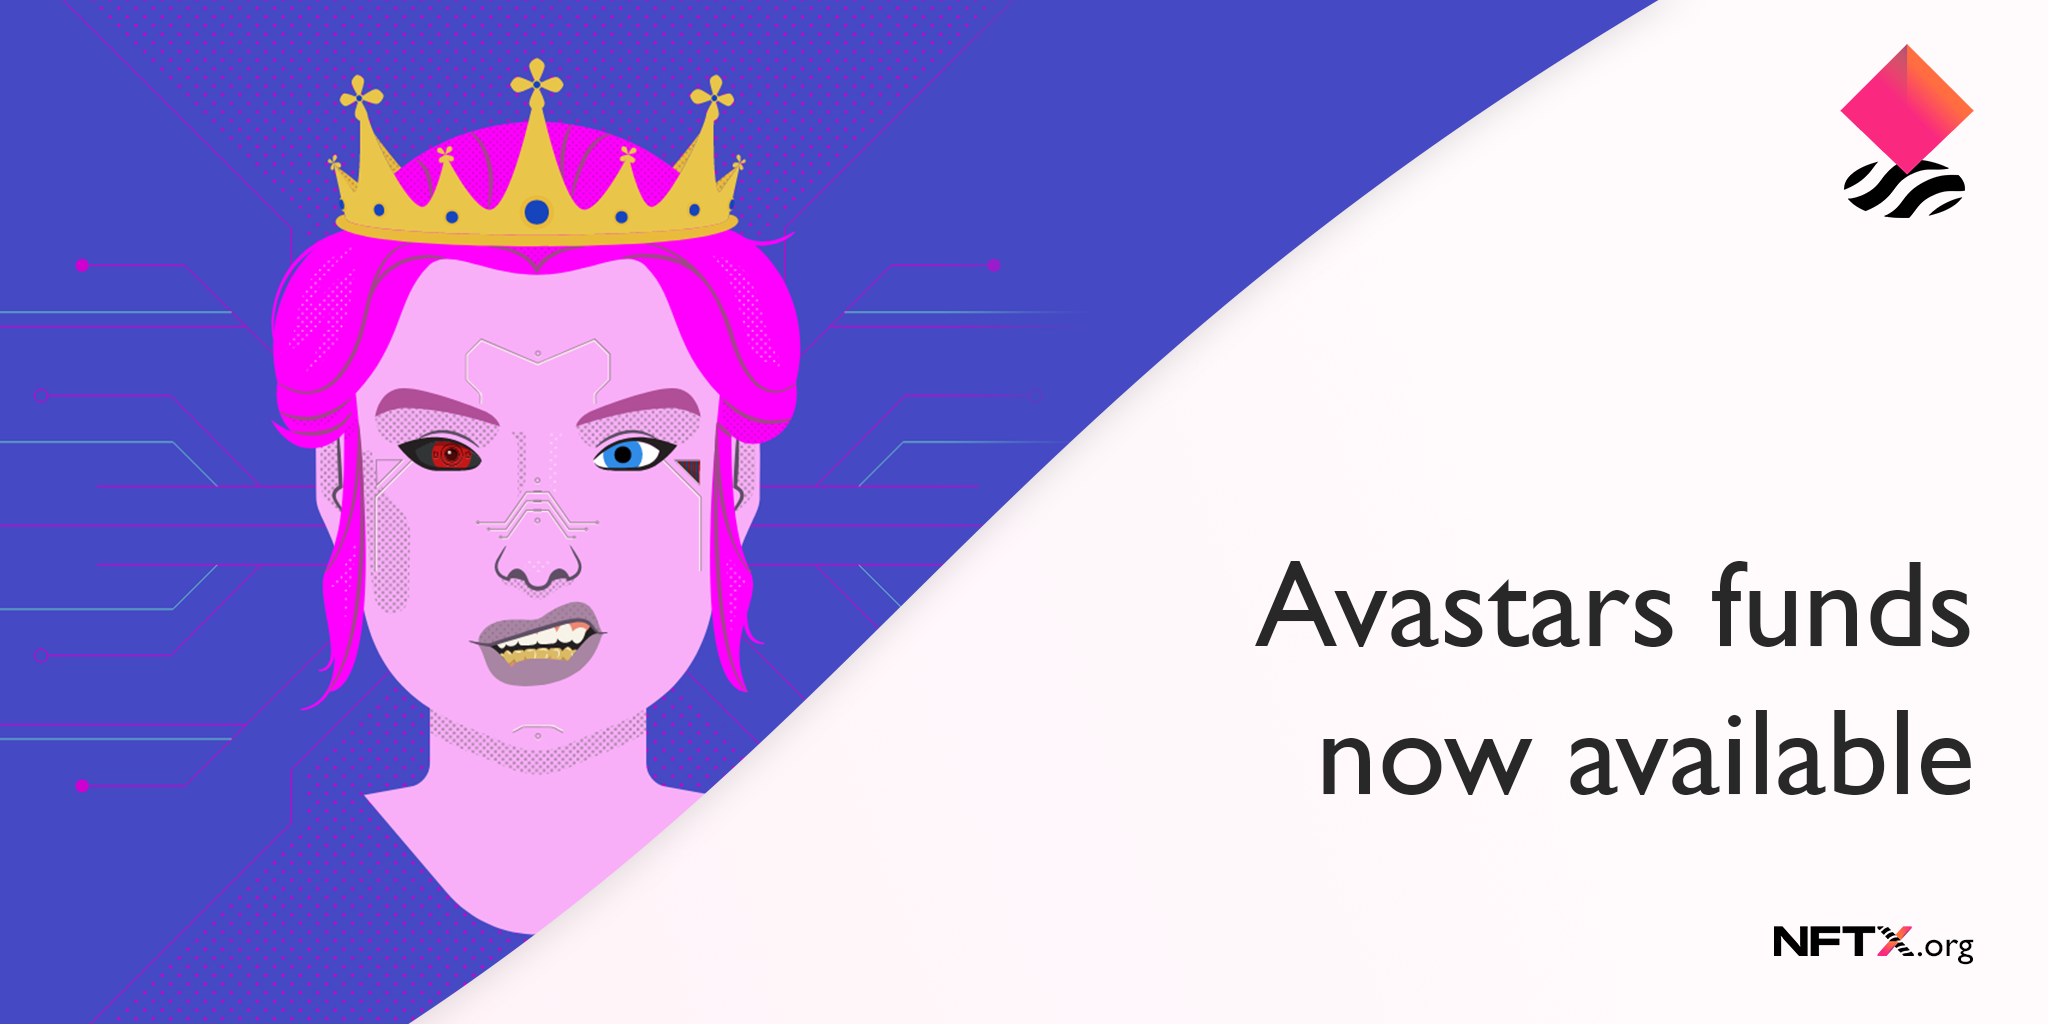 Avastars Index funds are now available